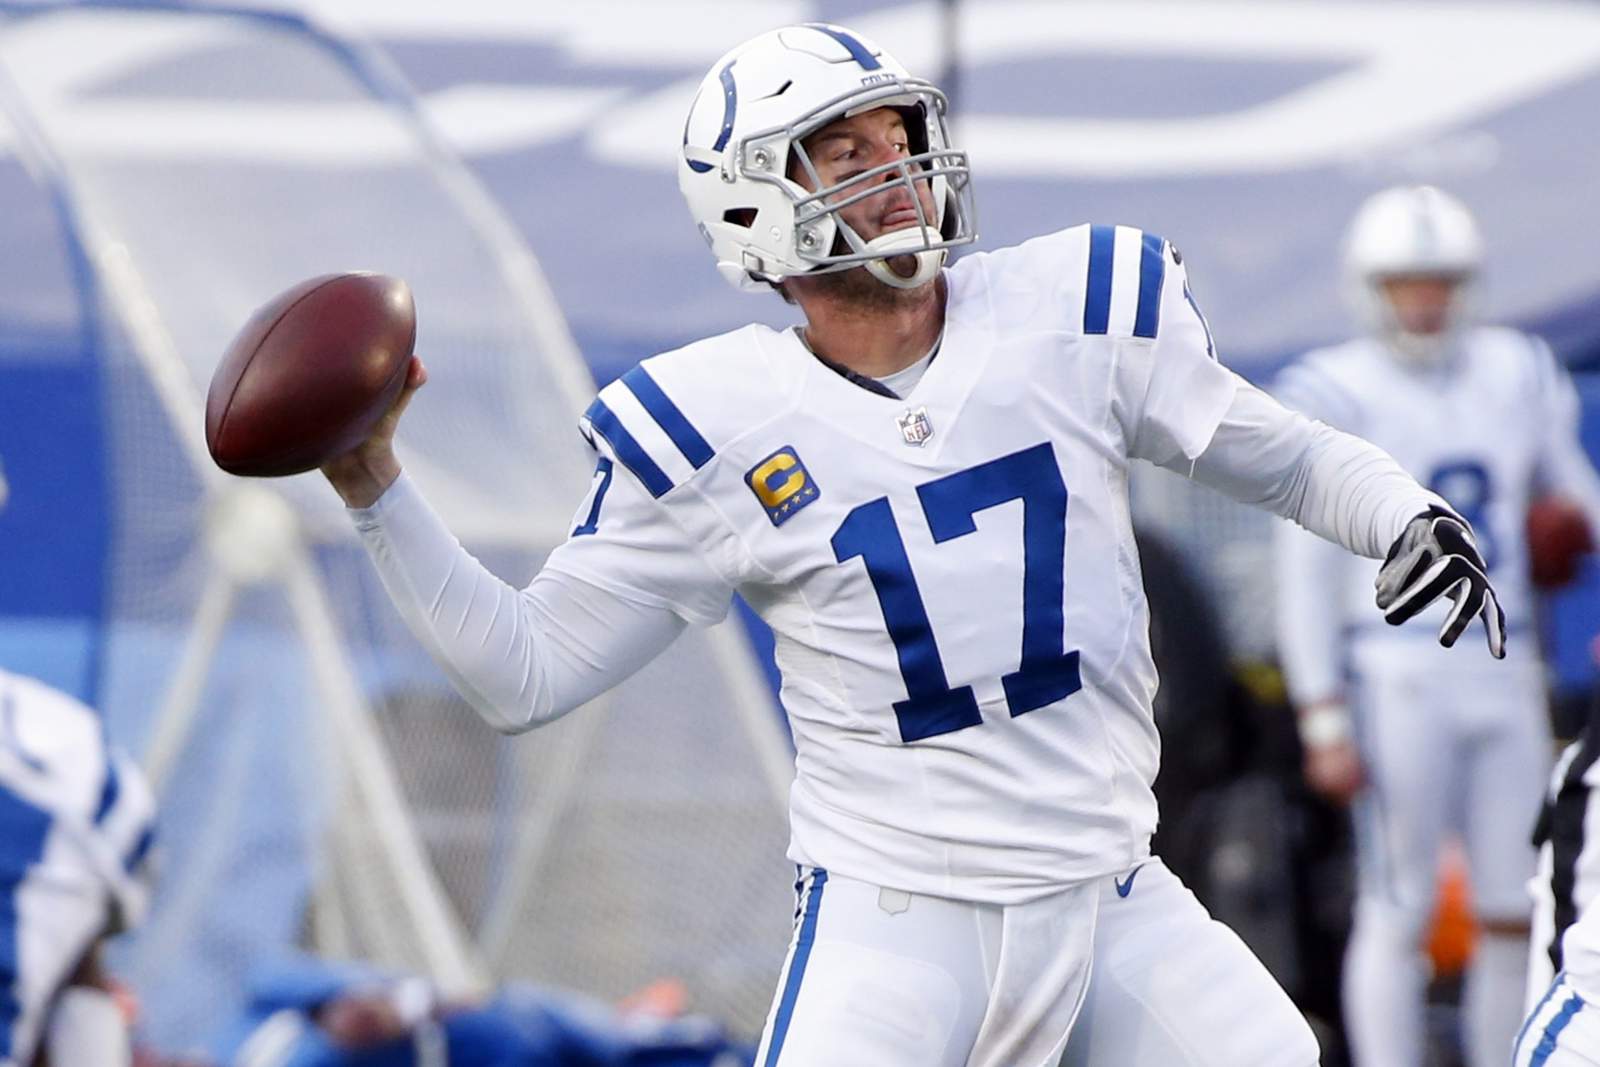 Colts QB Rivers, 39, retires from NFL after 17 seasons